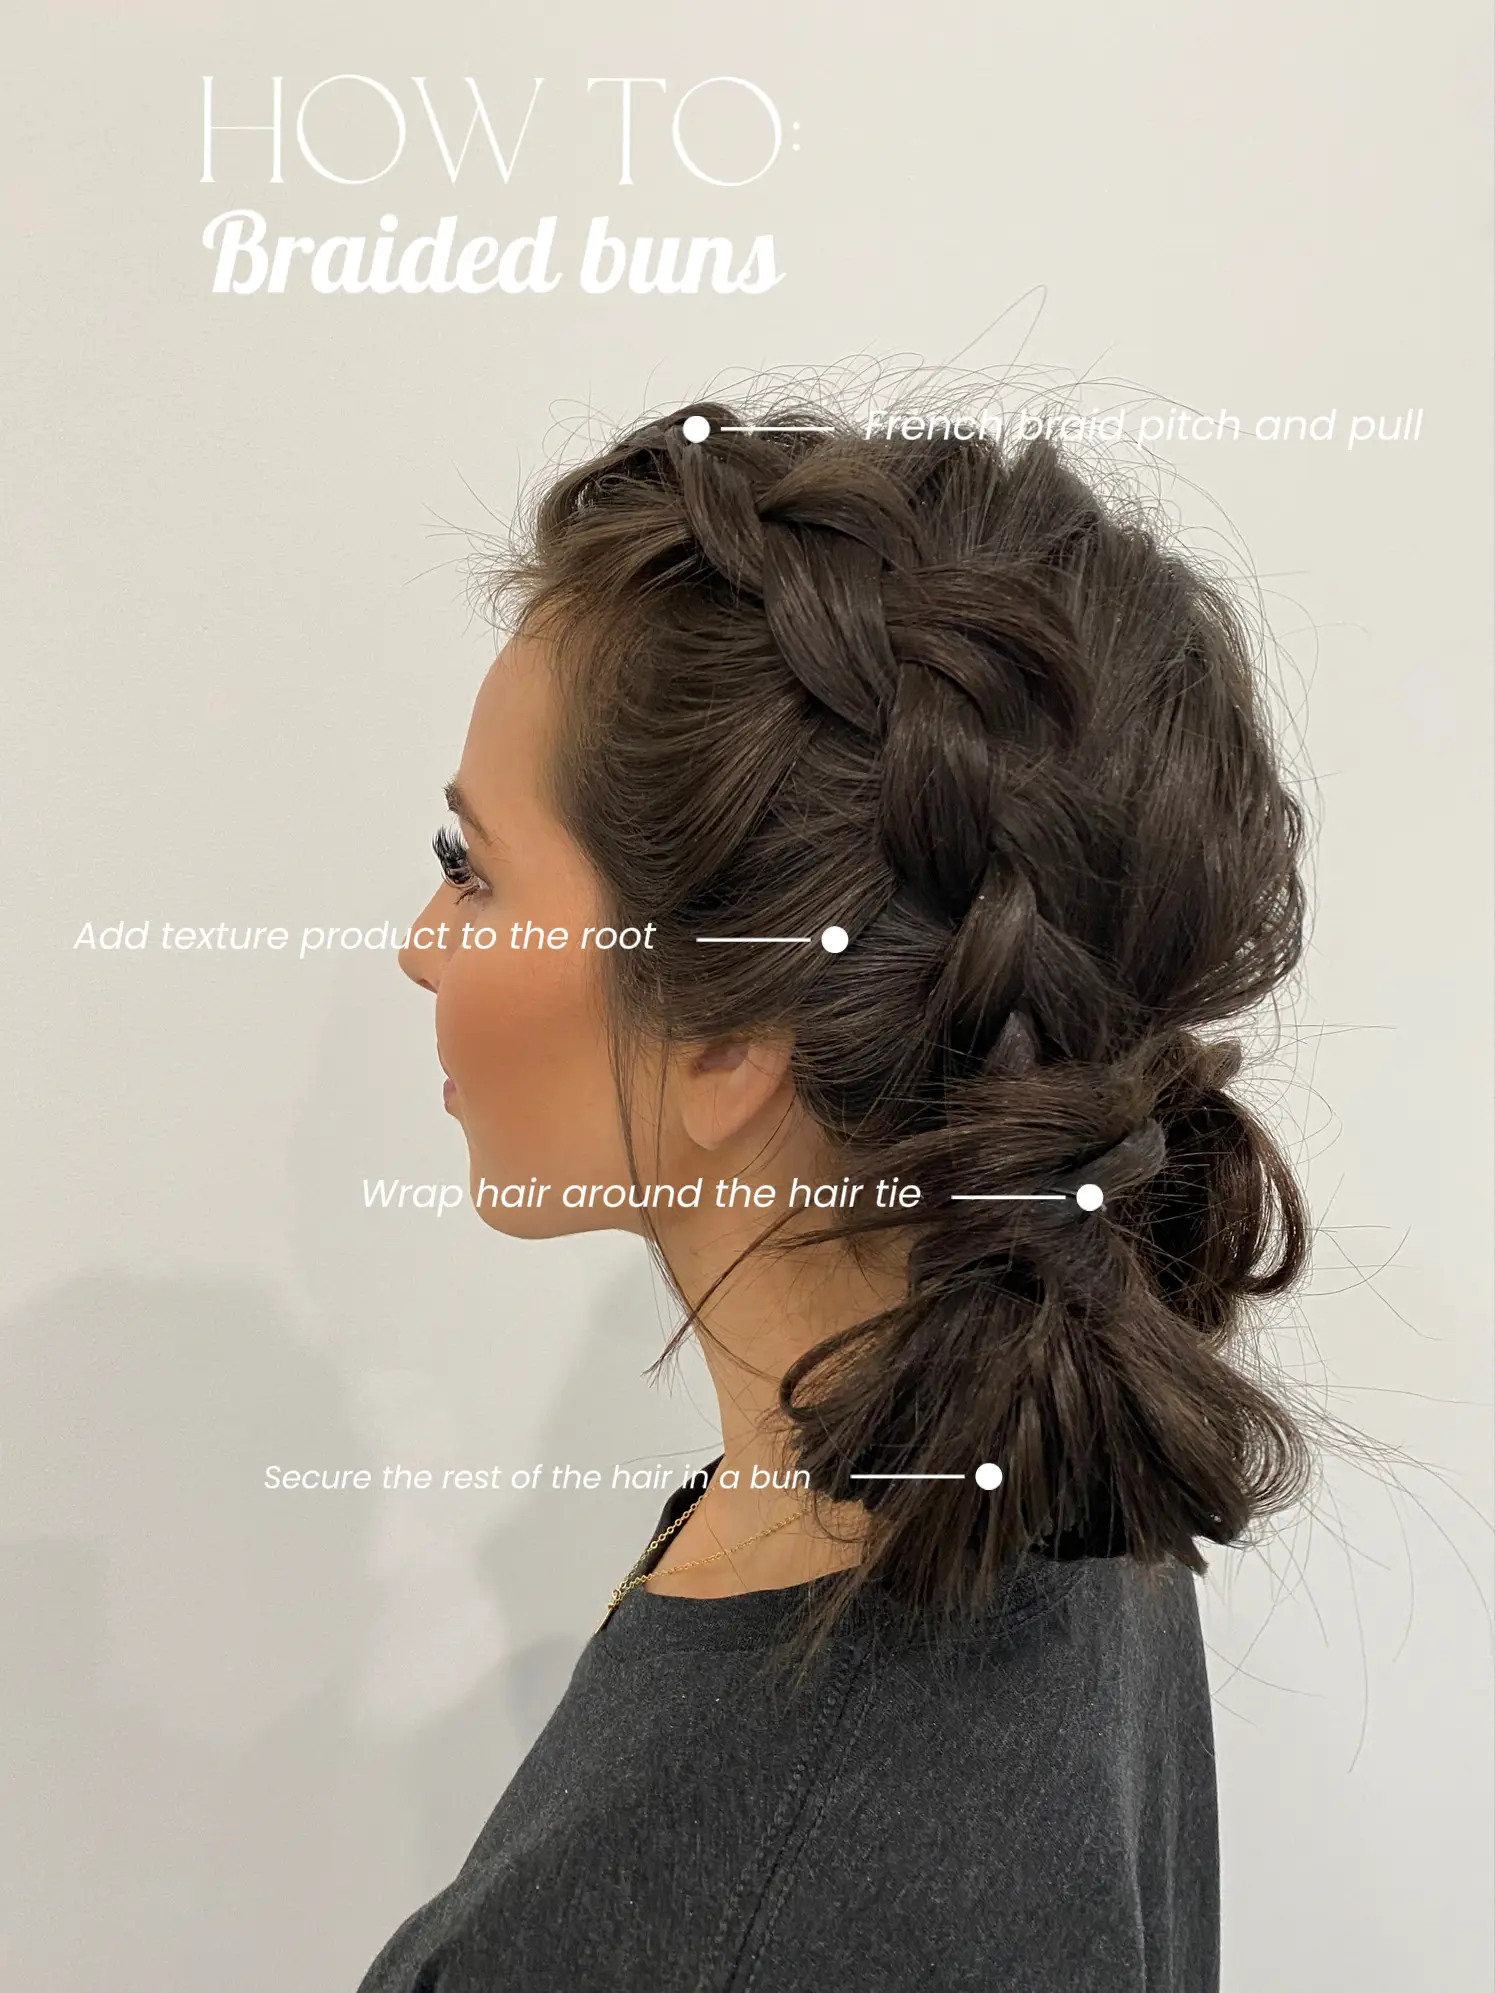 EASY FRENCH BRAID HAIR HACK ❤️ I've never been able to French braid hair,  so I've always relied on easy hair hacks. This is an ea